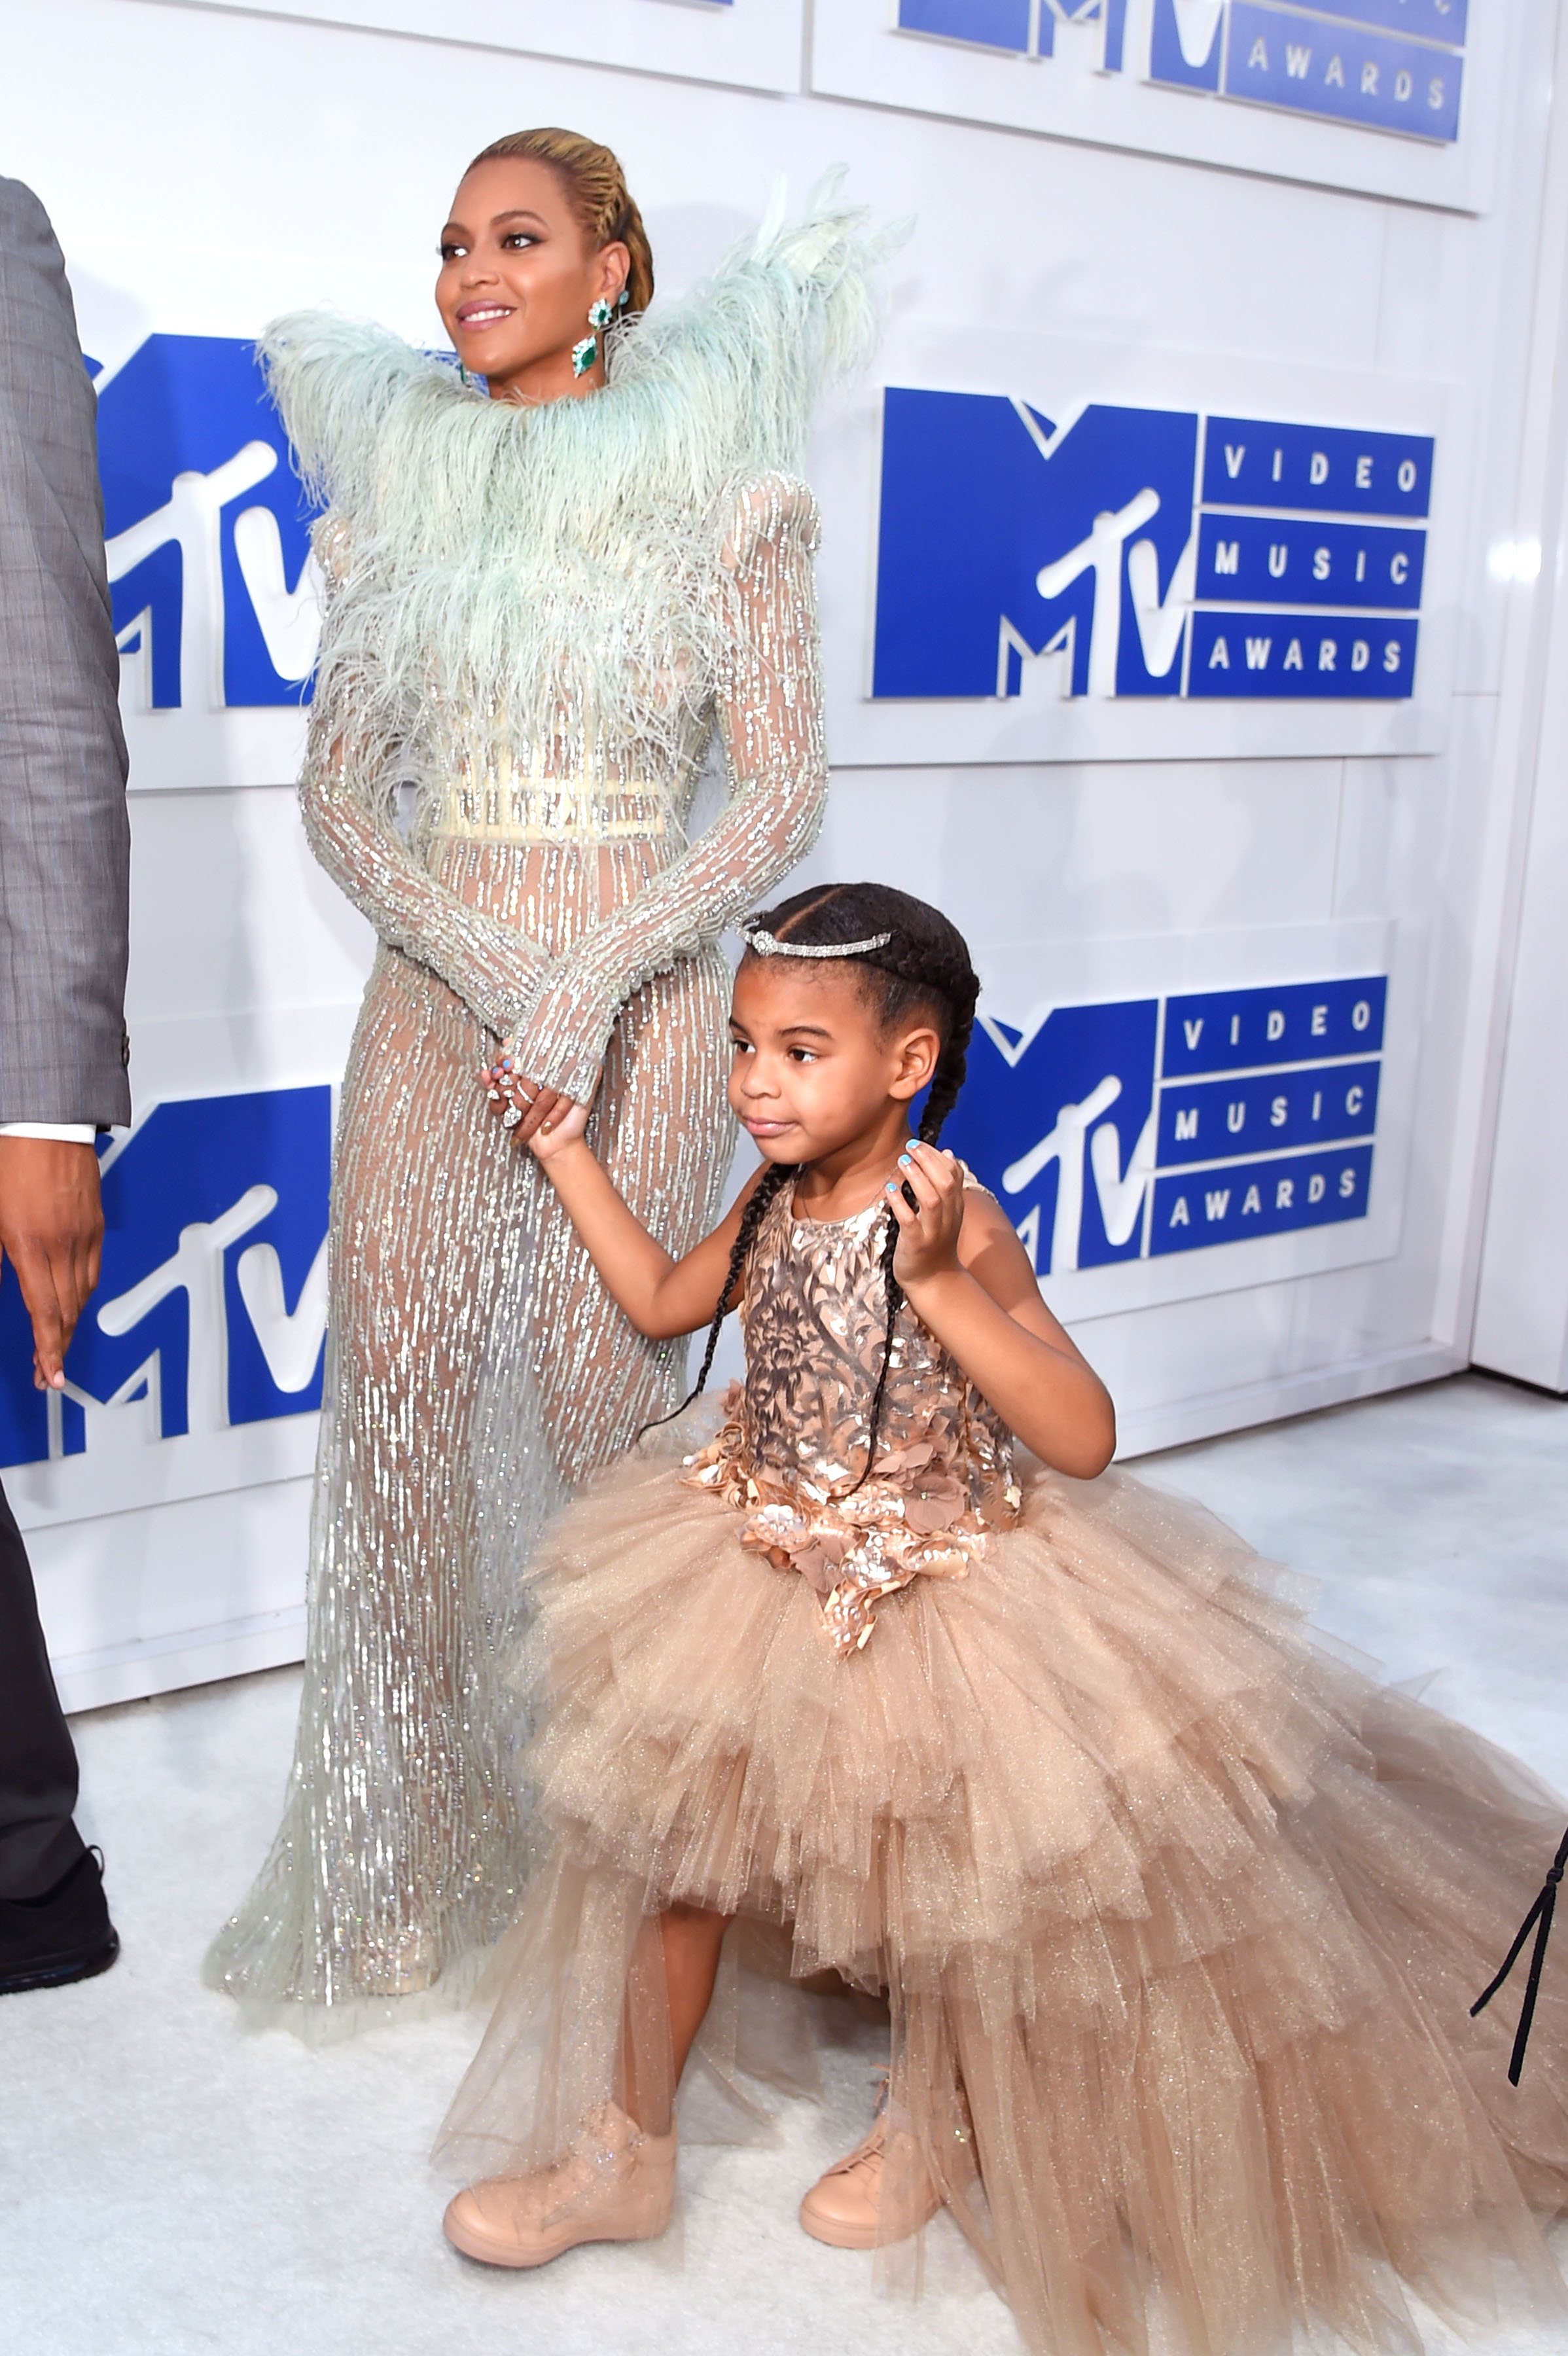 Beyonce and Blue Ivy attend the 2016 MTV Video Music Awards at Madison Square Garden on August 28, 2016 in New York City